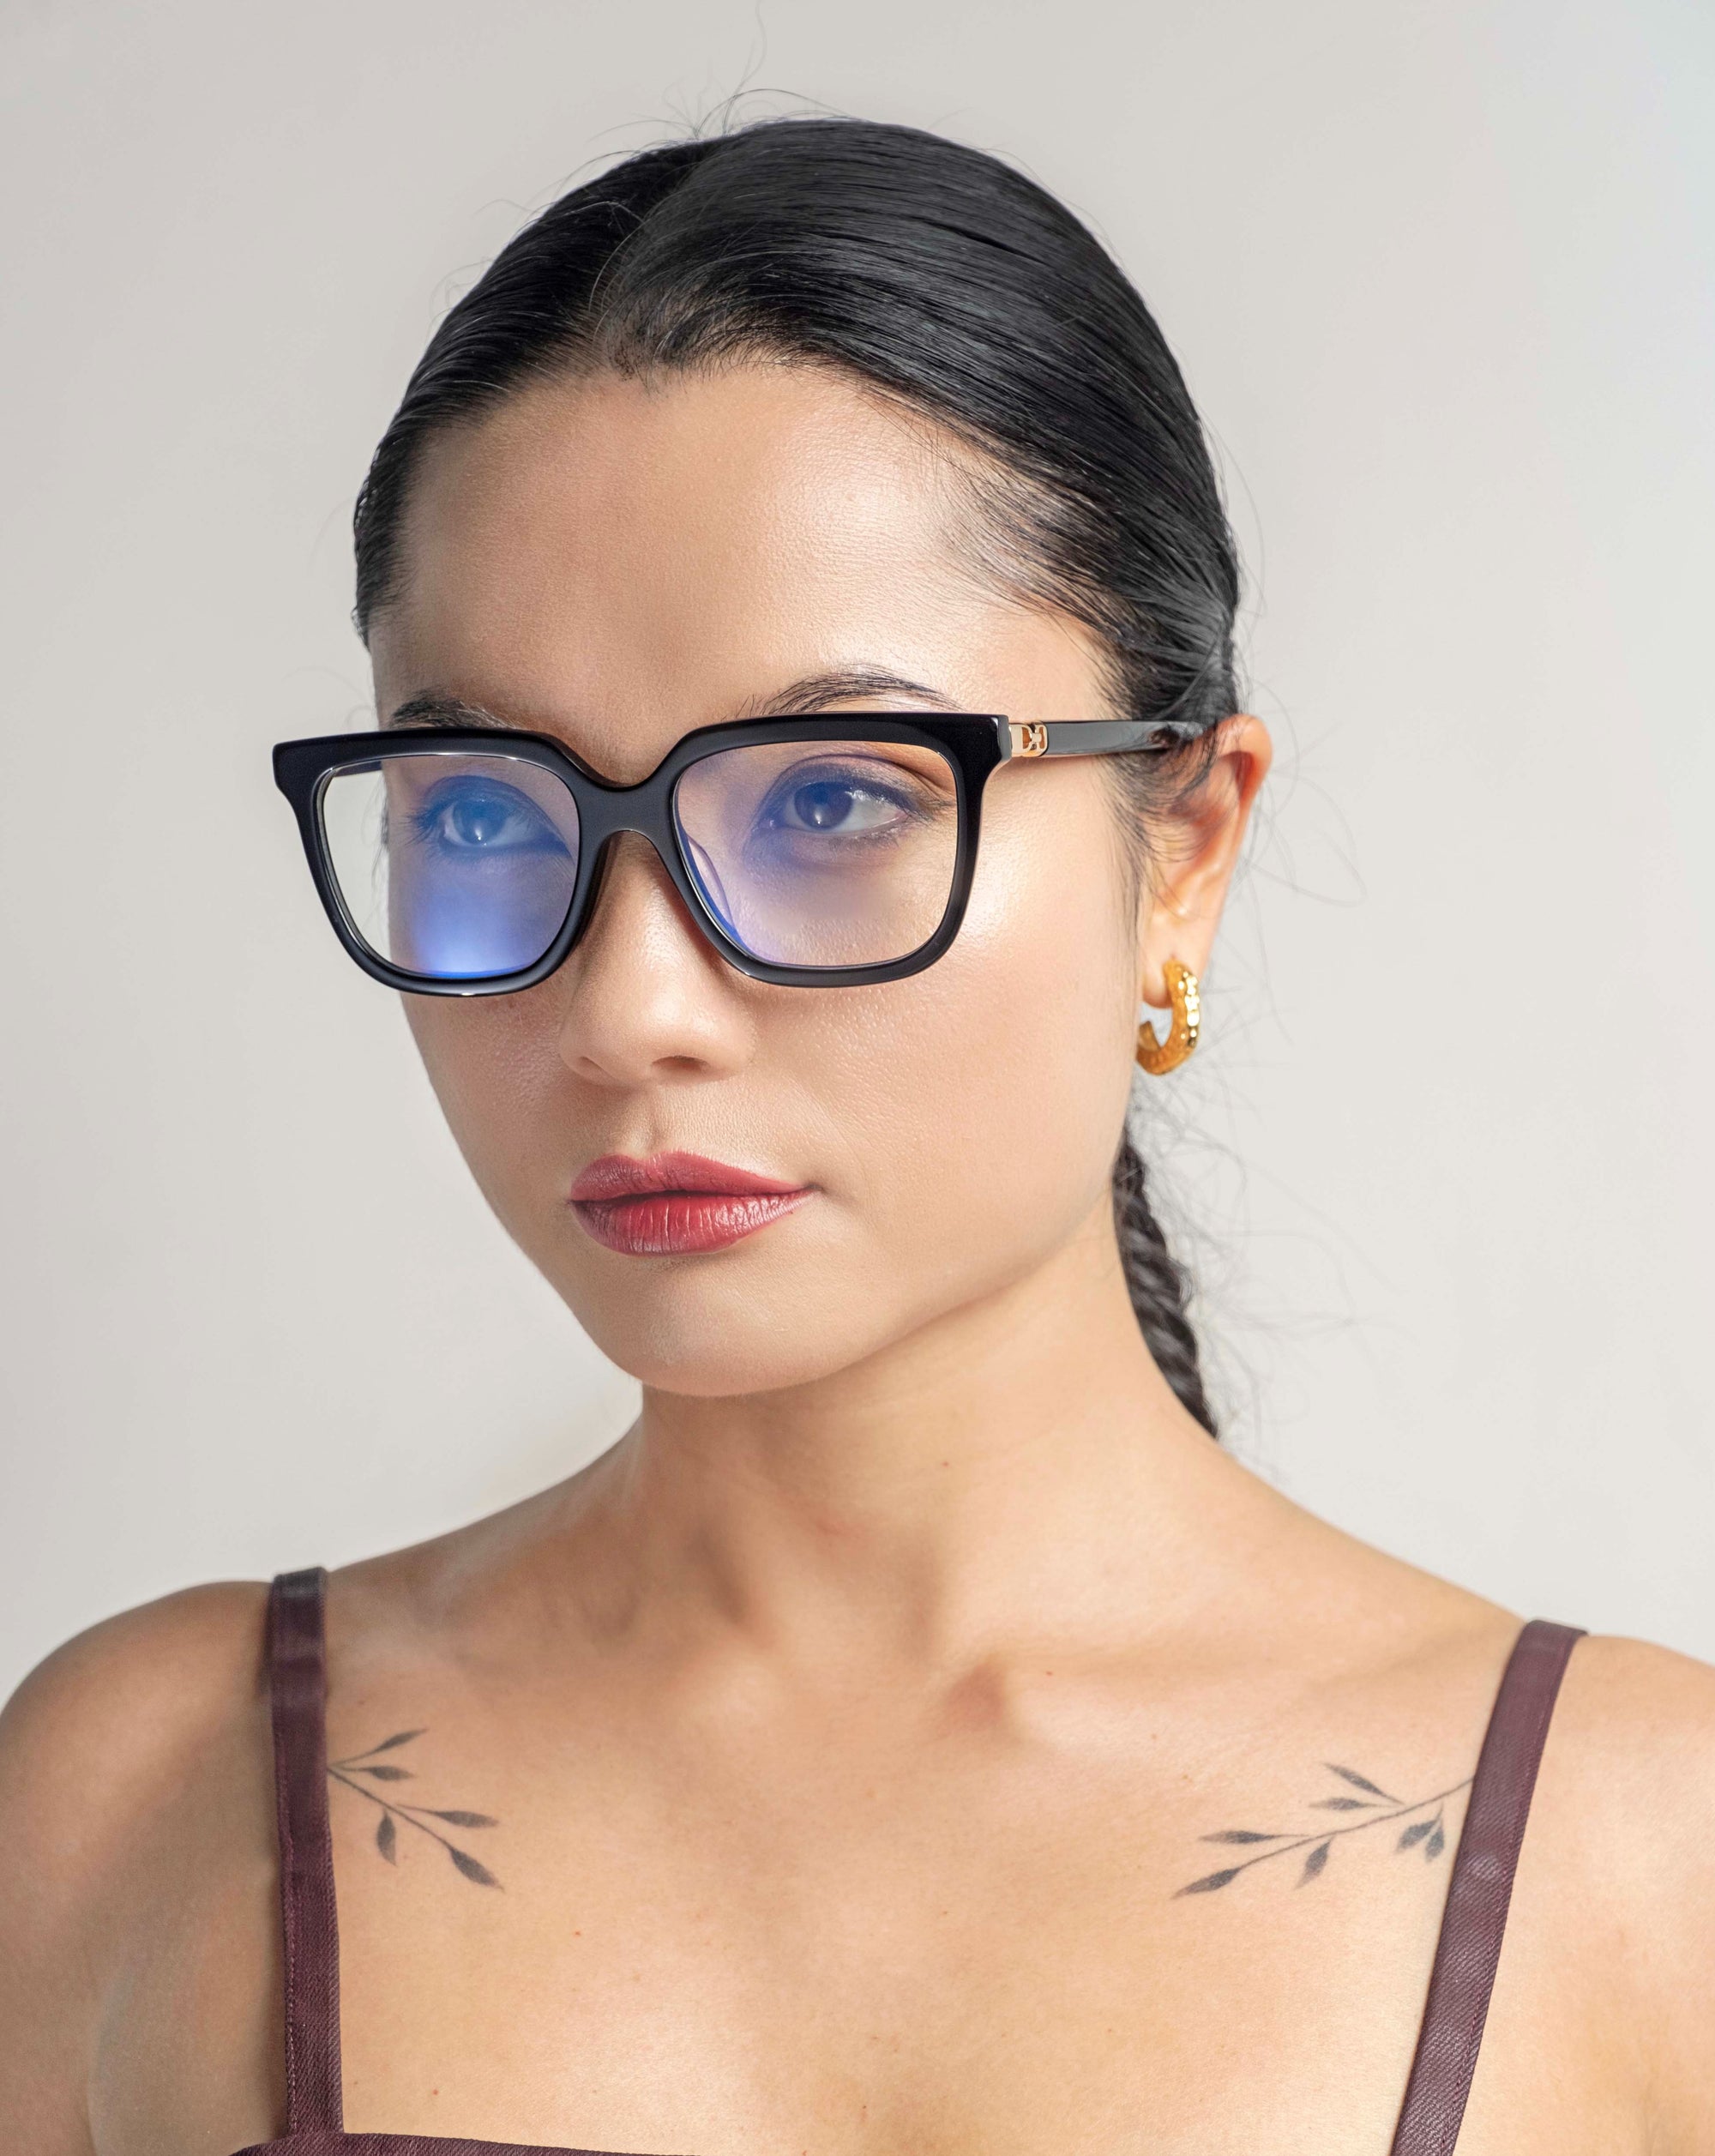 A person with long black hair, styled in a braid, is wearing Nina glasses from For Art&#39;s Sake® and 18-karat gold hoop earrings. They have subtle tattoos on their shoulders, visible due to the sleeveless top they are wearing. The background is light and plain.